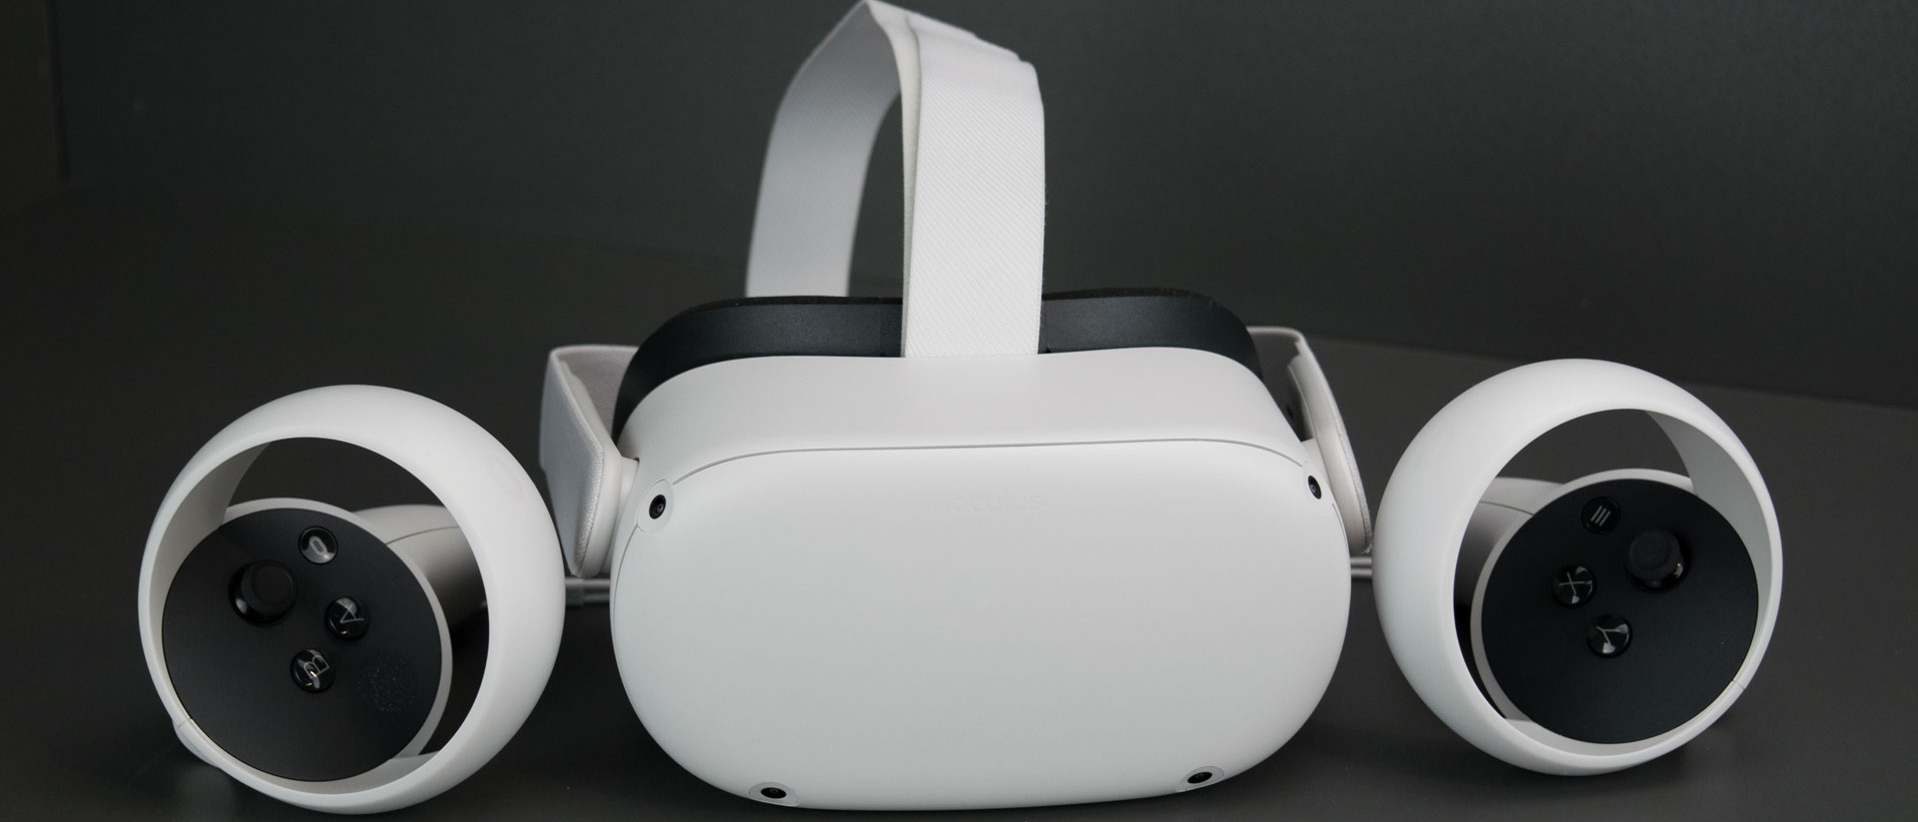 oculus go with 2 controllers